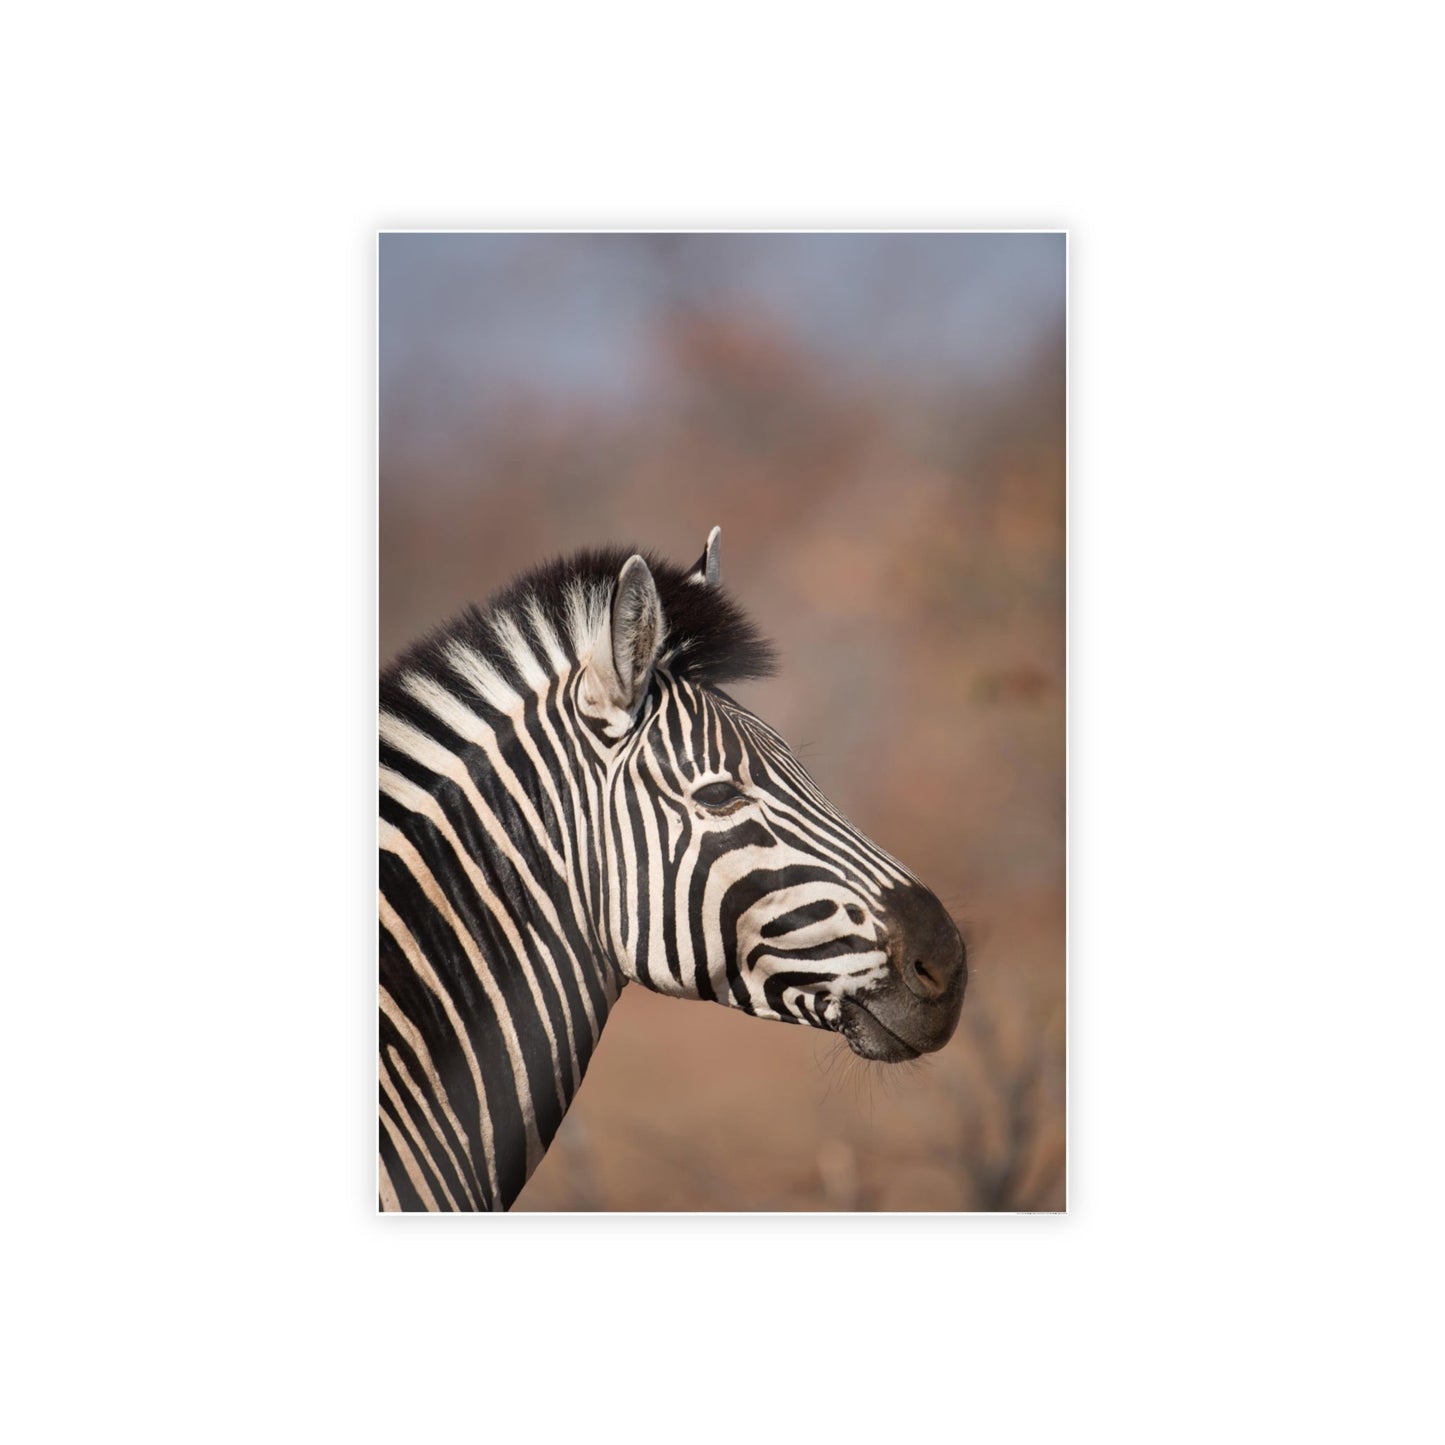 Wild Beauty: Natural Canvas and Framed Poster Featuring a Majestic Zebra